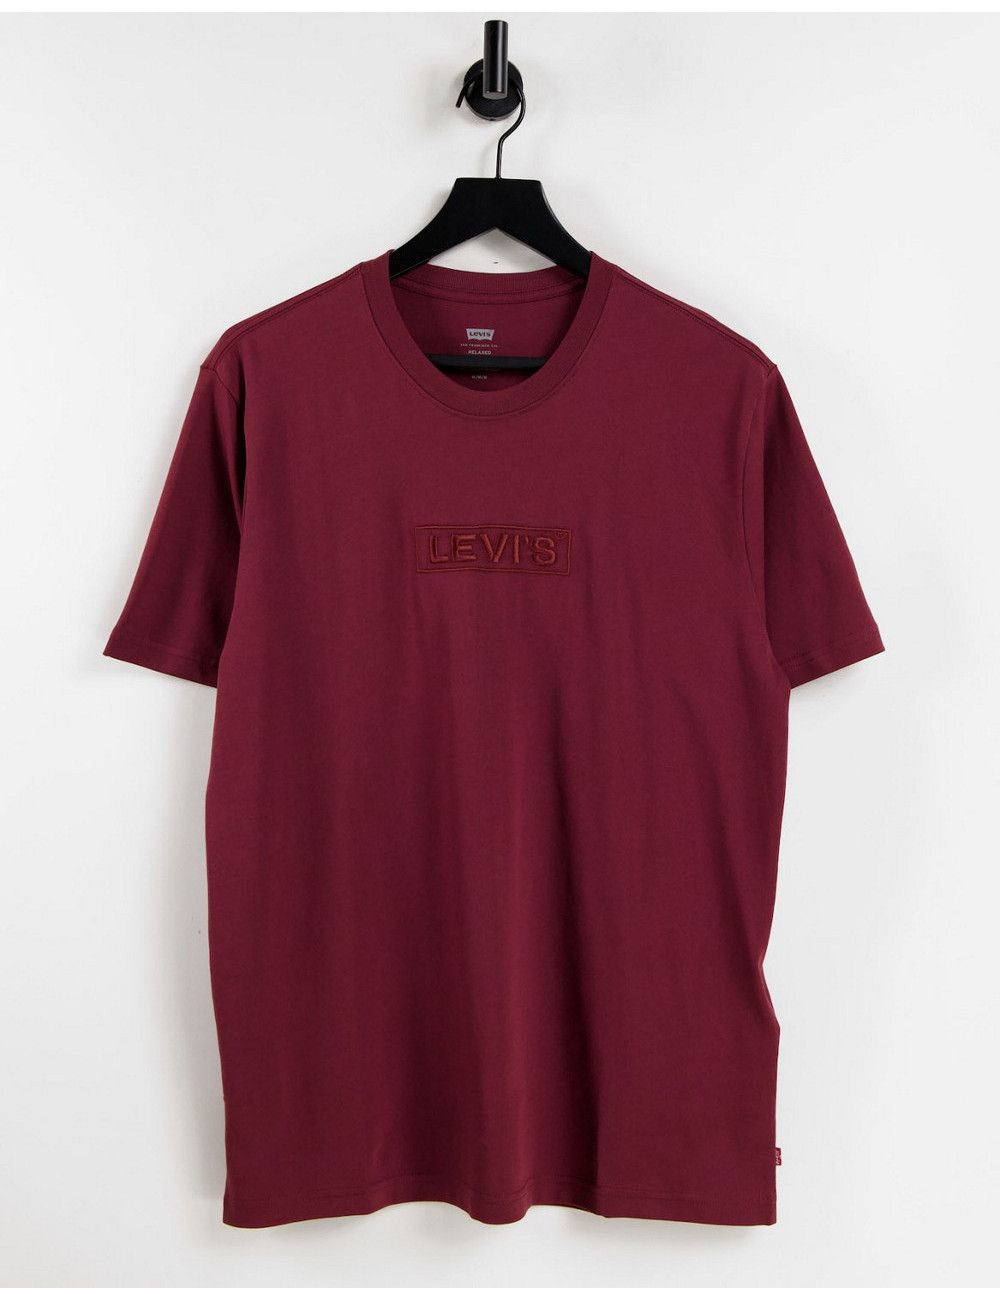 Levi's relaxed fit t-shirt